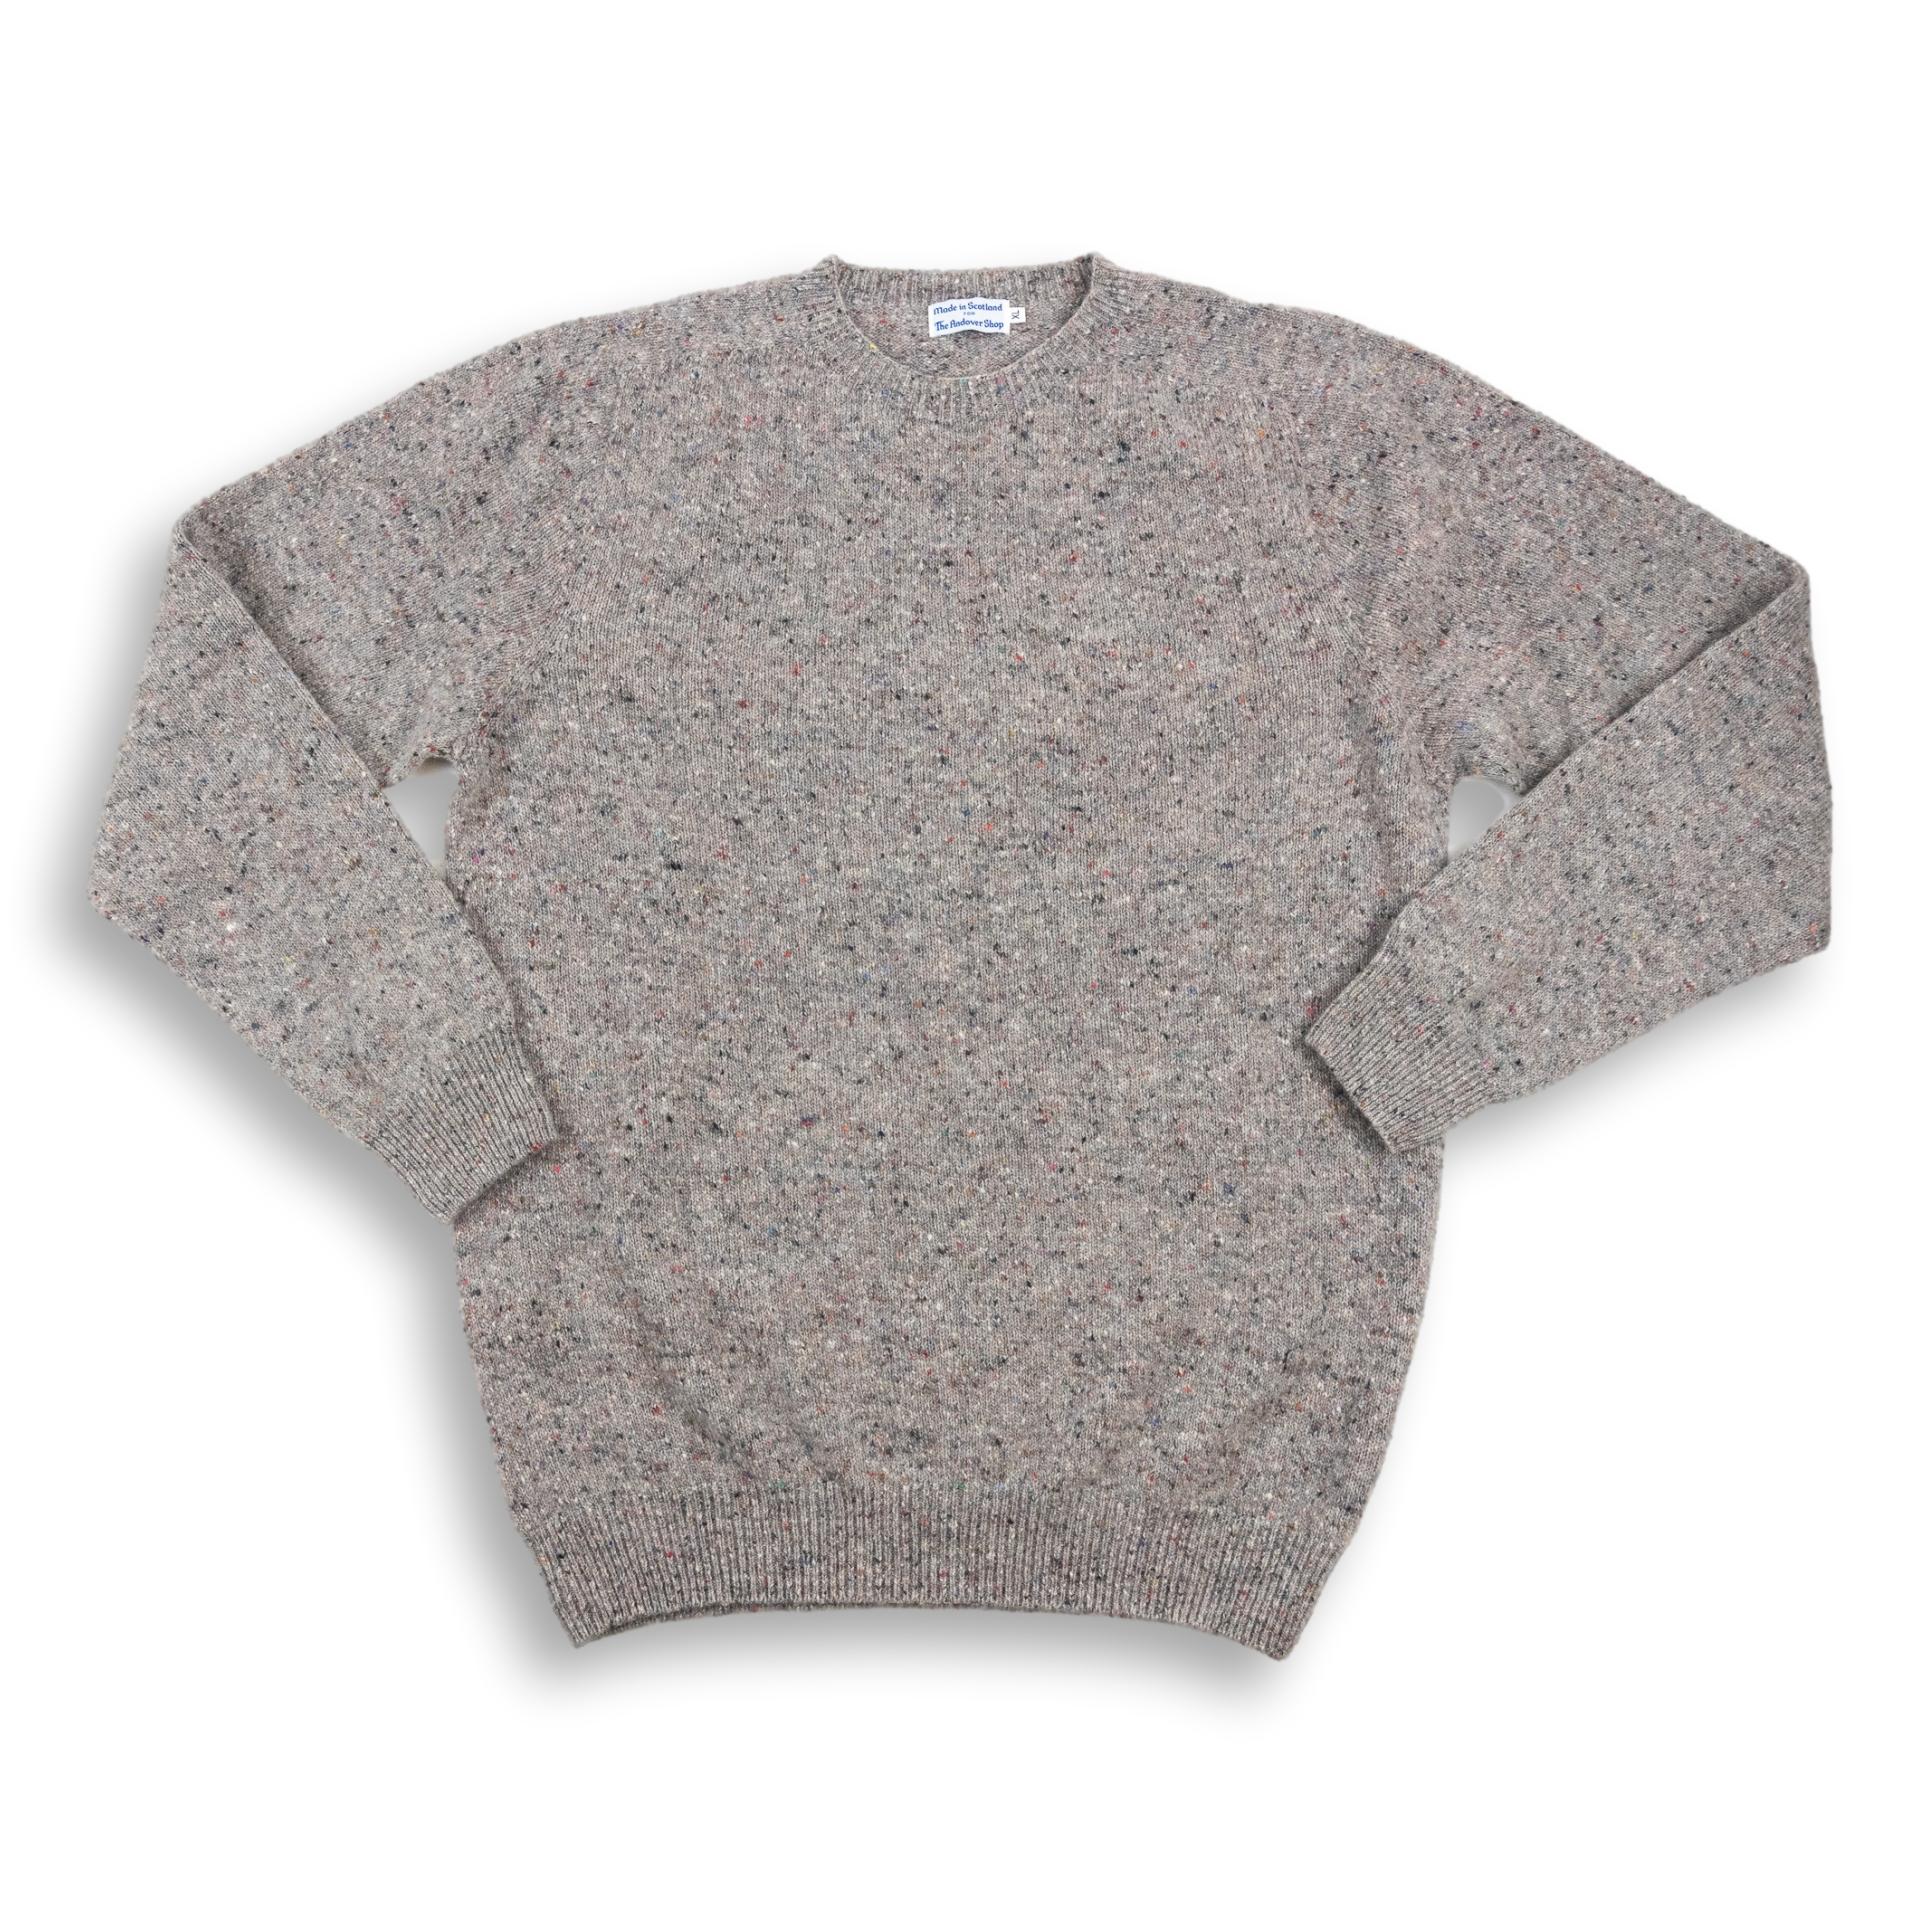 Cashmere and Merino Wool Crewneck Donegal Sweater